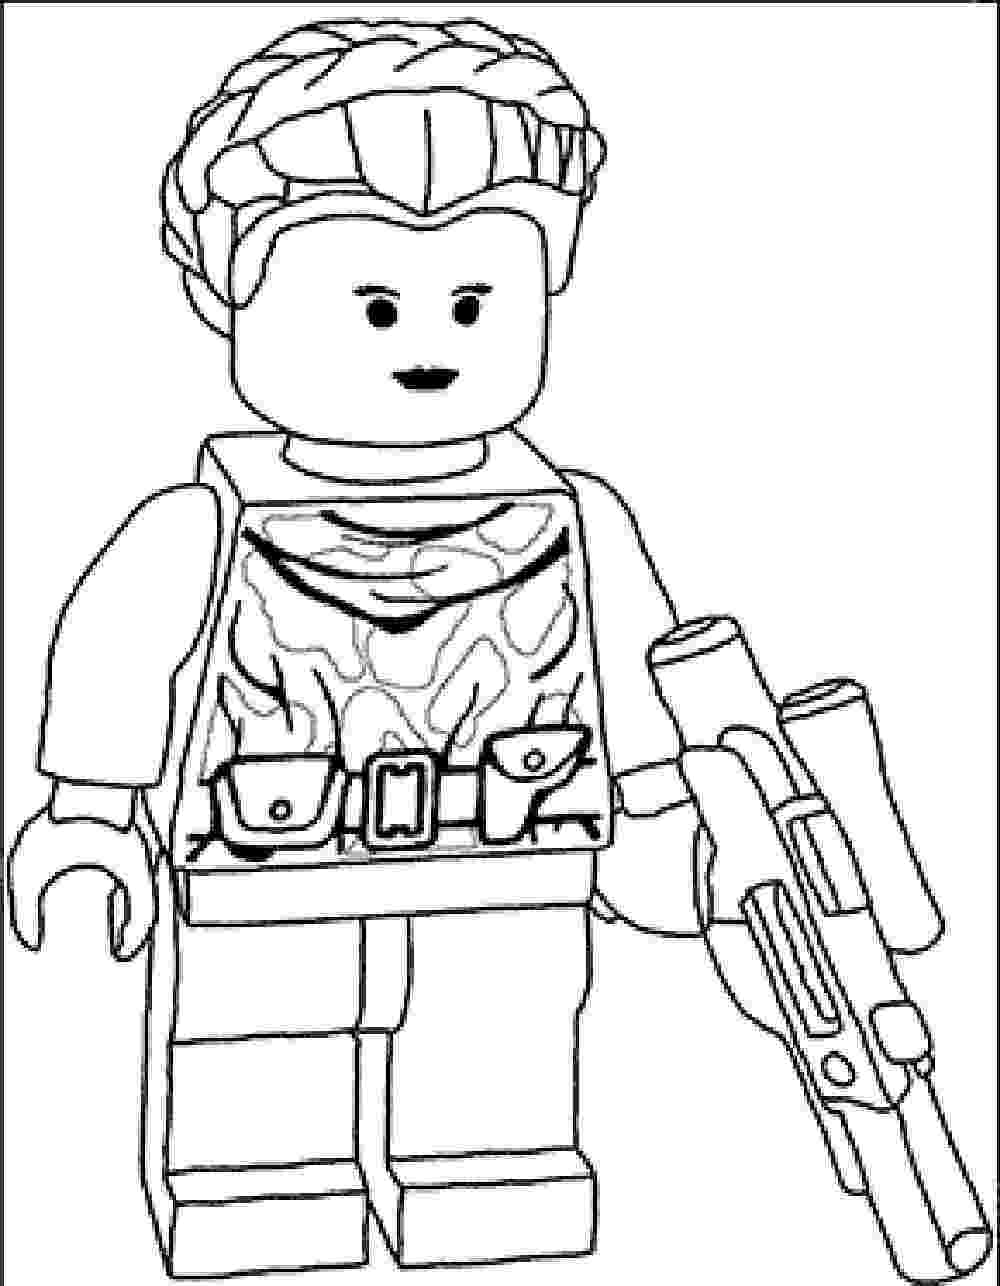 lego star wars coloring pictures lego star wars coloring pages to print bestappsforkidscom lego pictures star wars coloring 